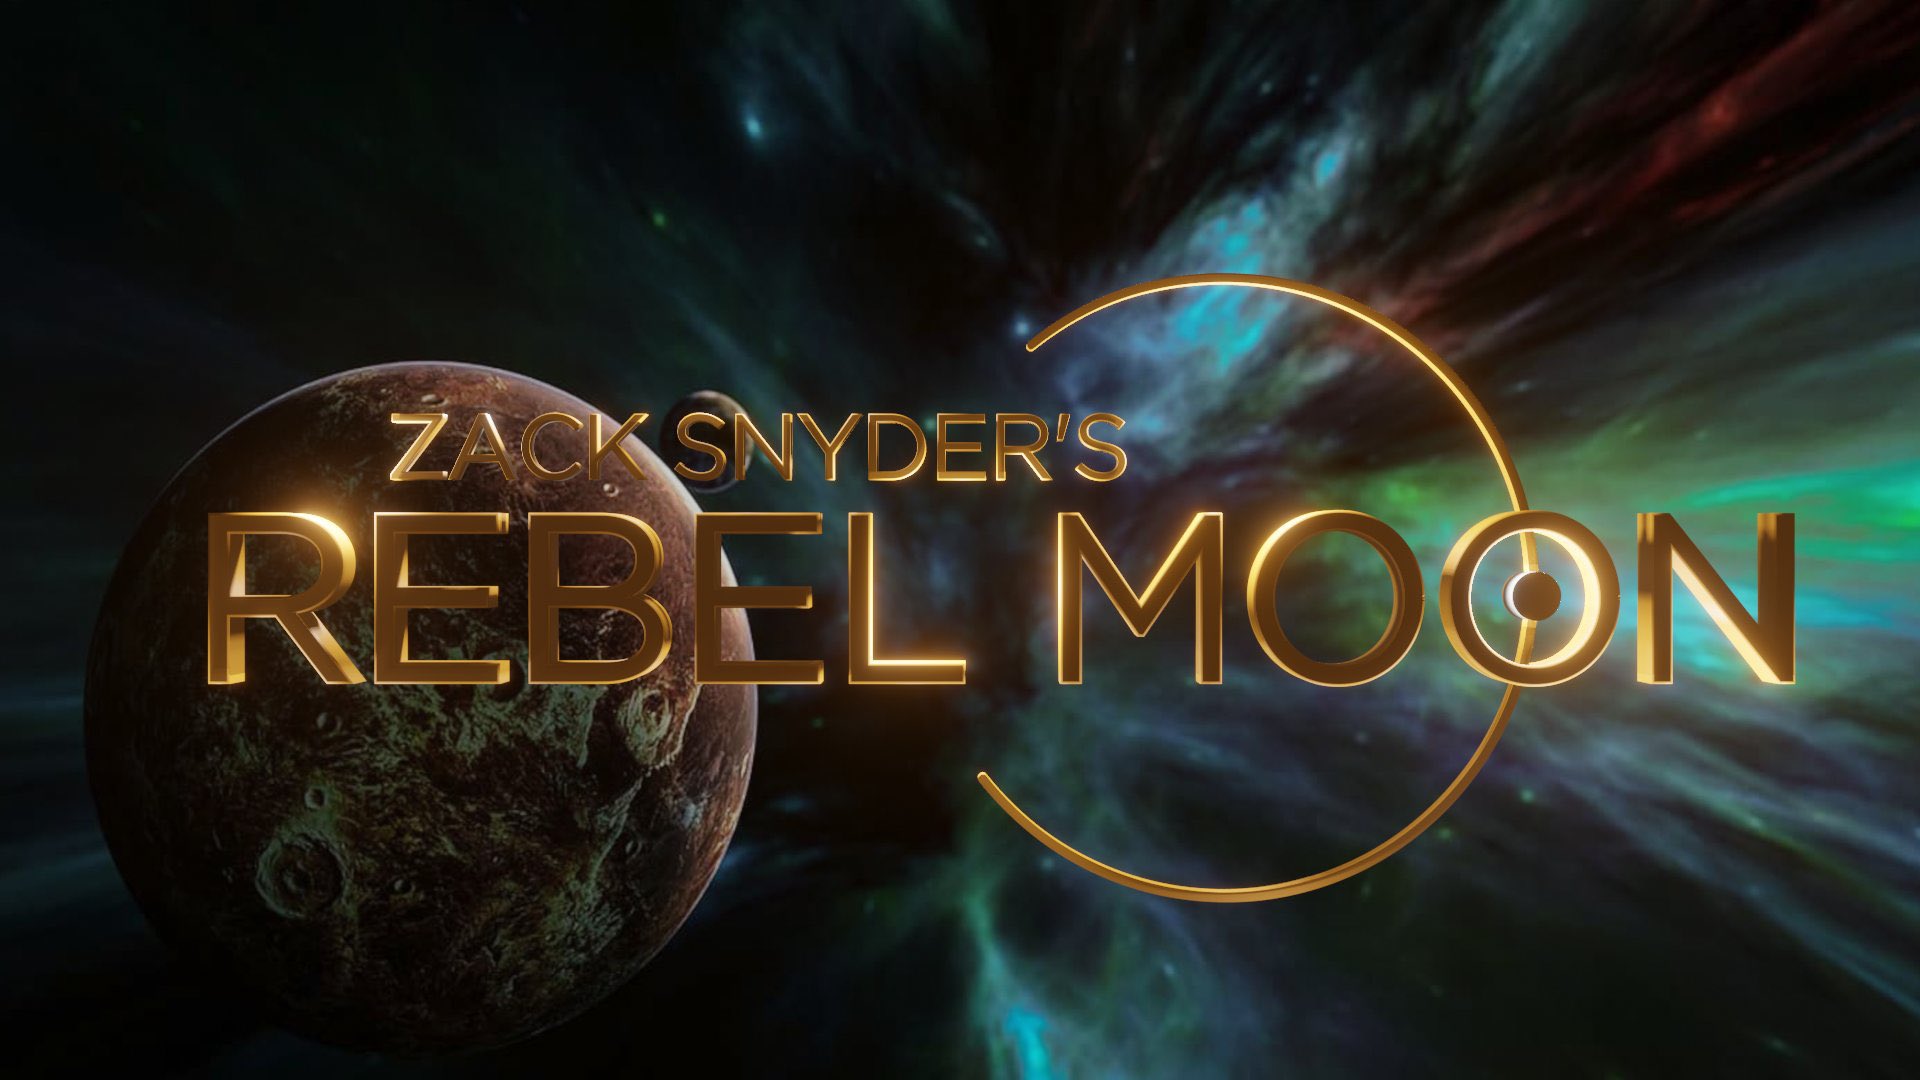 Zack Snyder's Rebel moon you rebel moon logo revealed! Haha, this is amazing work my friend Zack's team should hire you